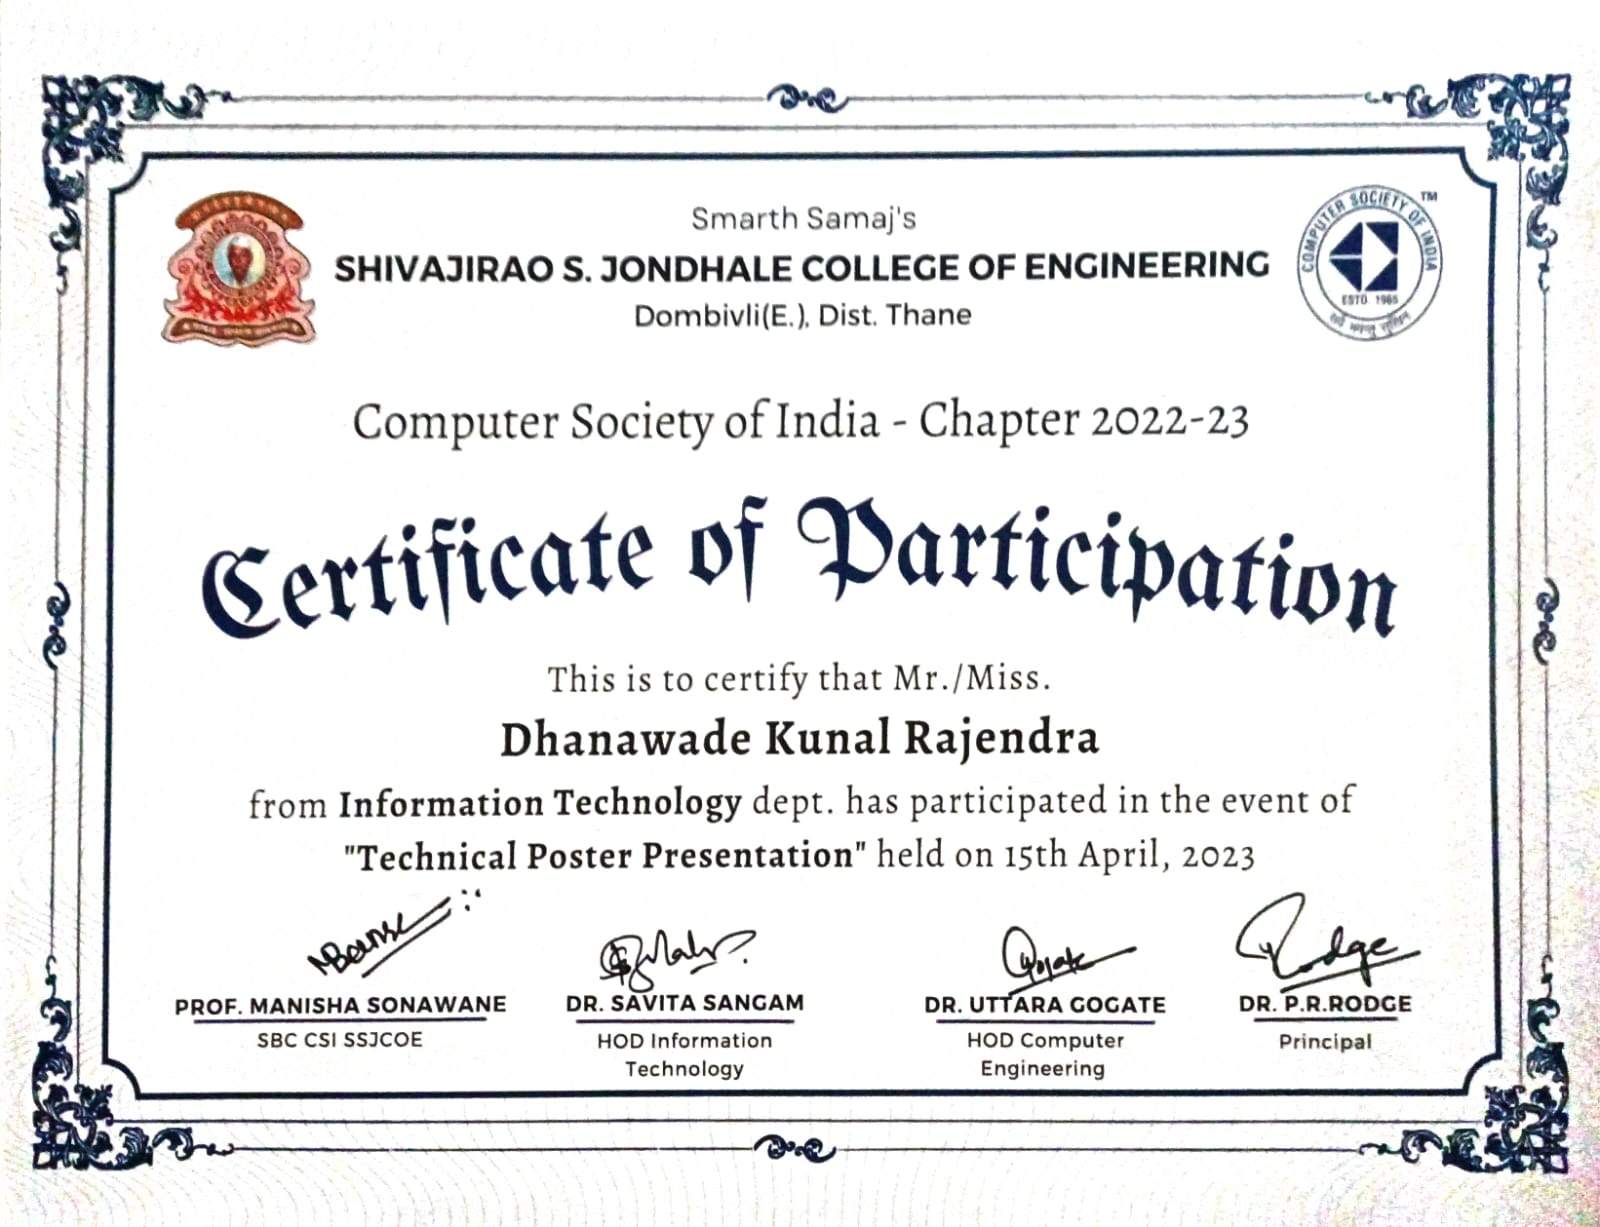 Certificate of Participation in Technical Poster Presentation by CSI